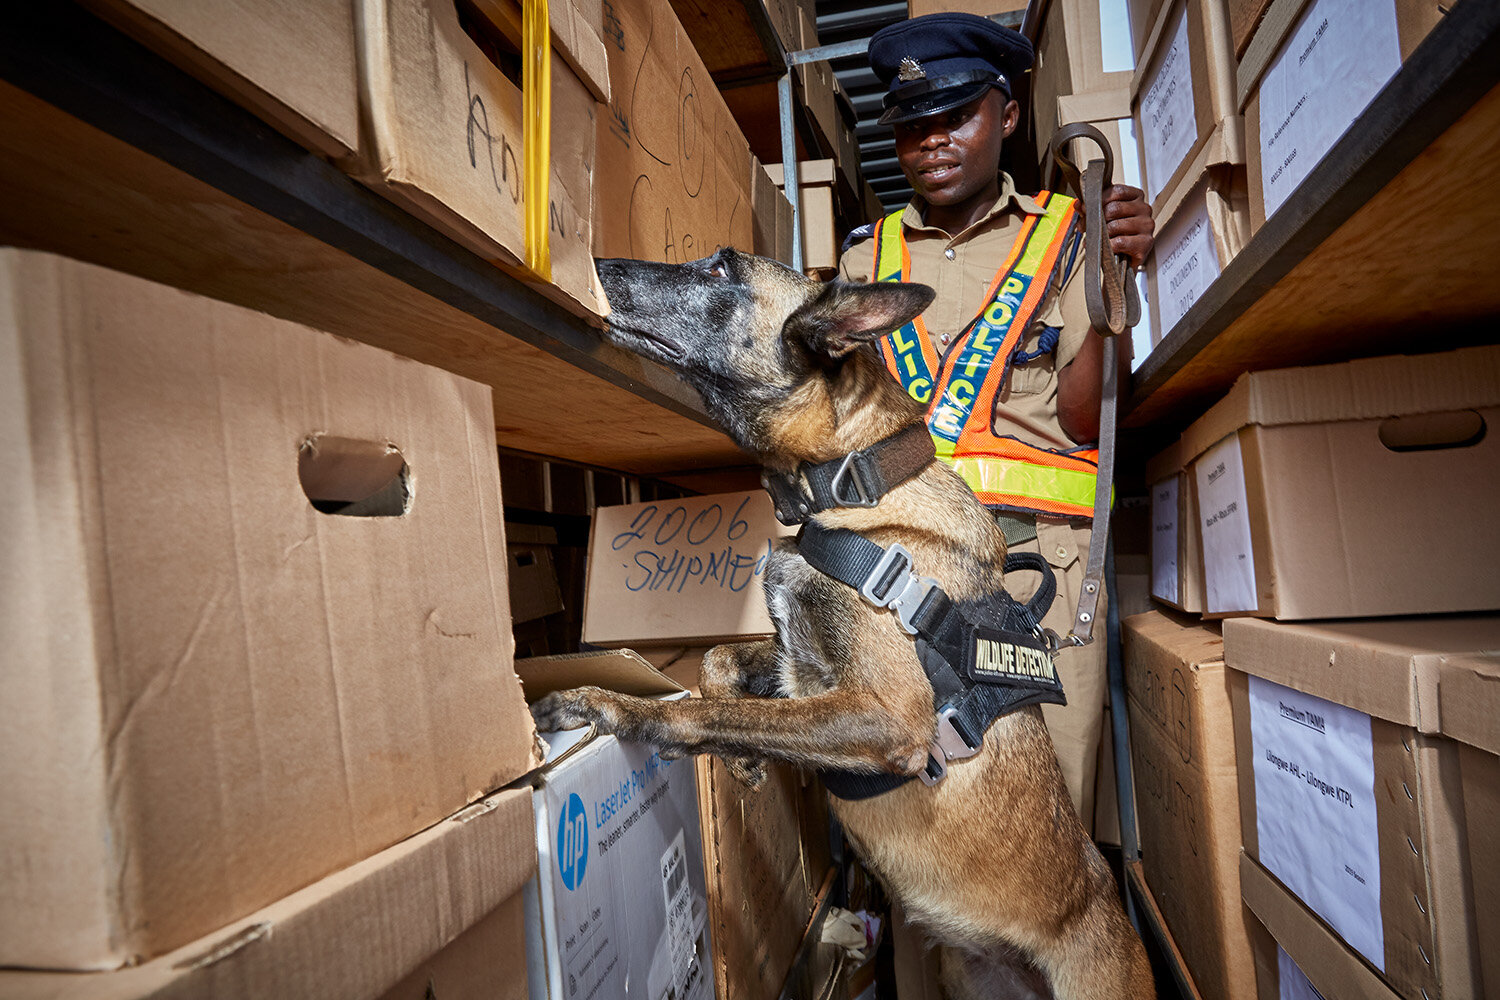  WDDU handler Benjamin and dog Nikita search a container during a training session at Bridge Shipping, Lilongwe, Malawi, 2020. 